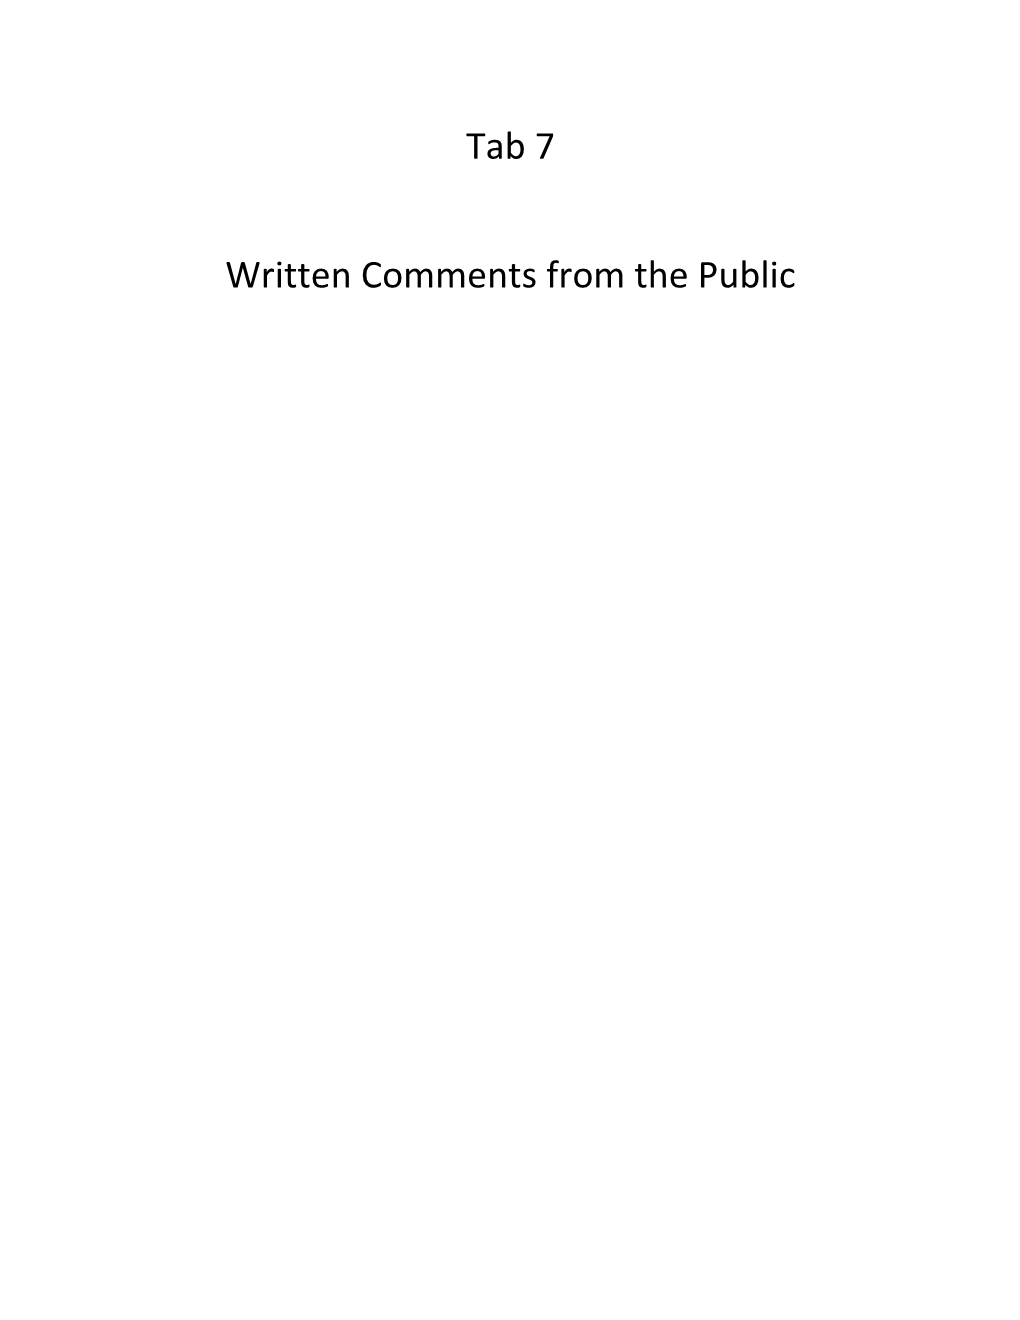 Tab 7 Written Comments from the Public